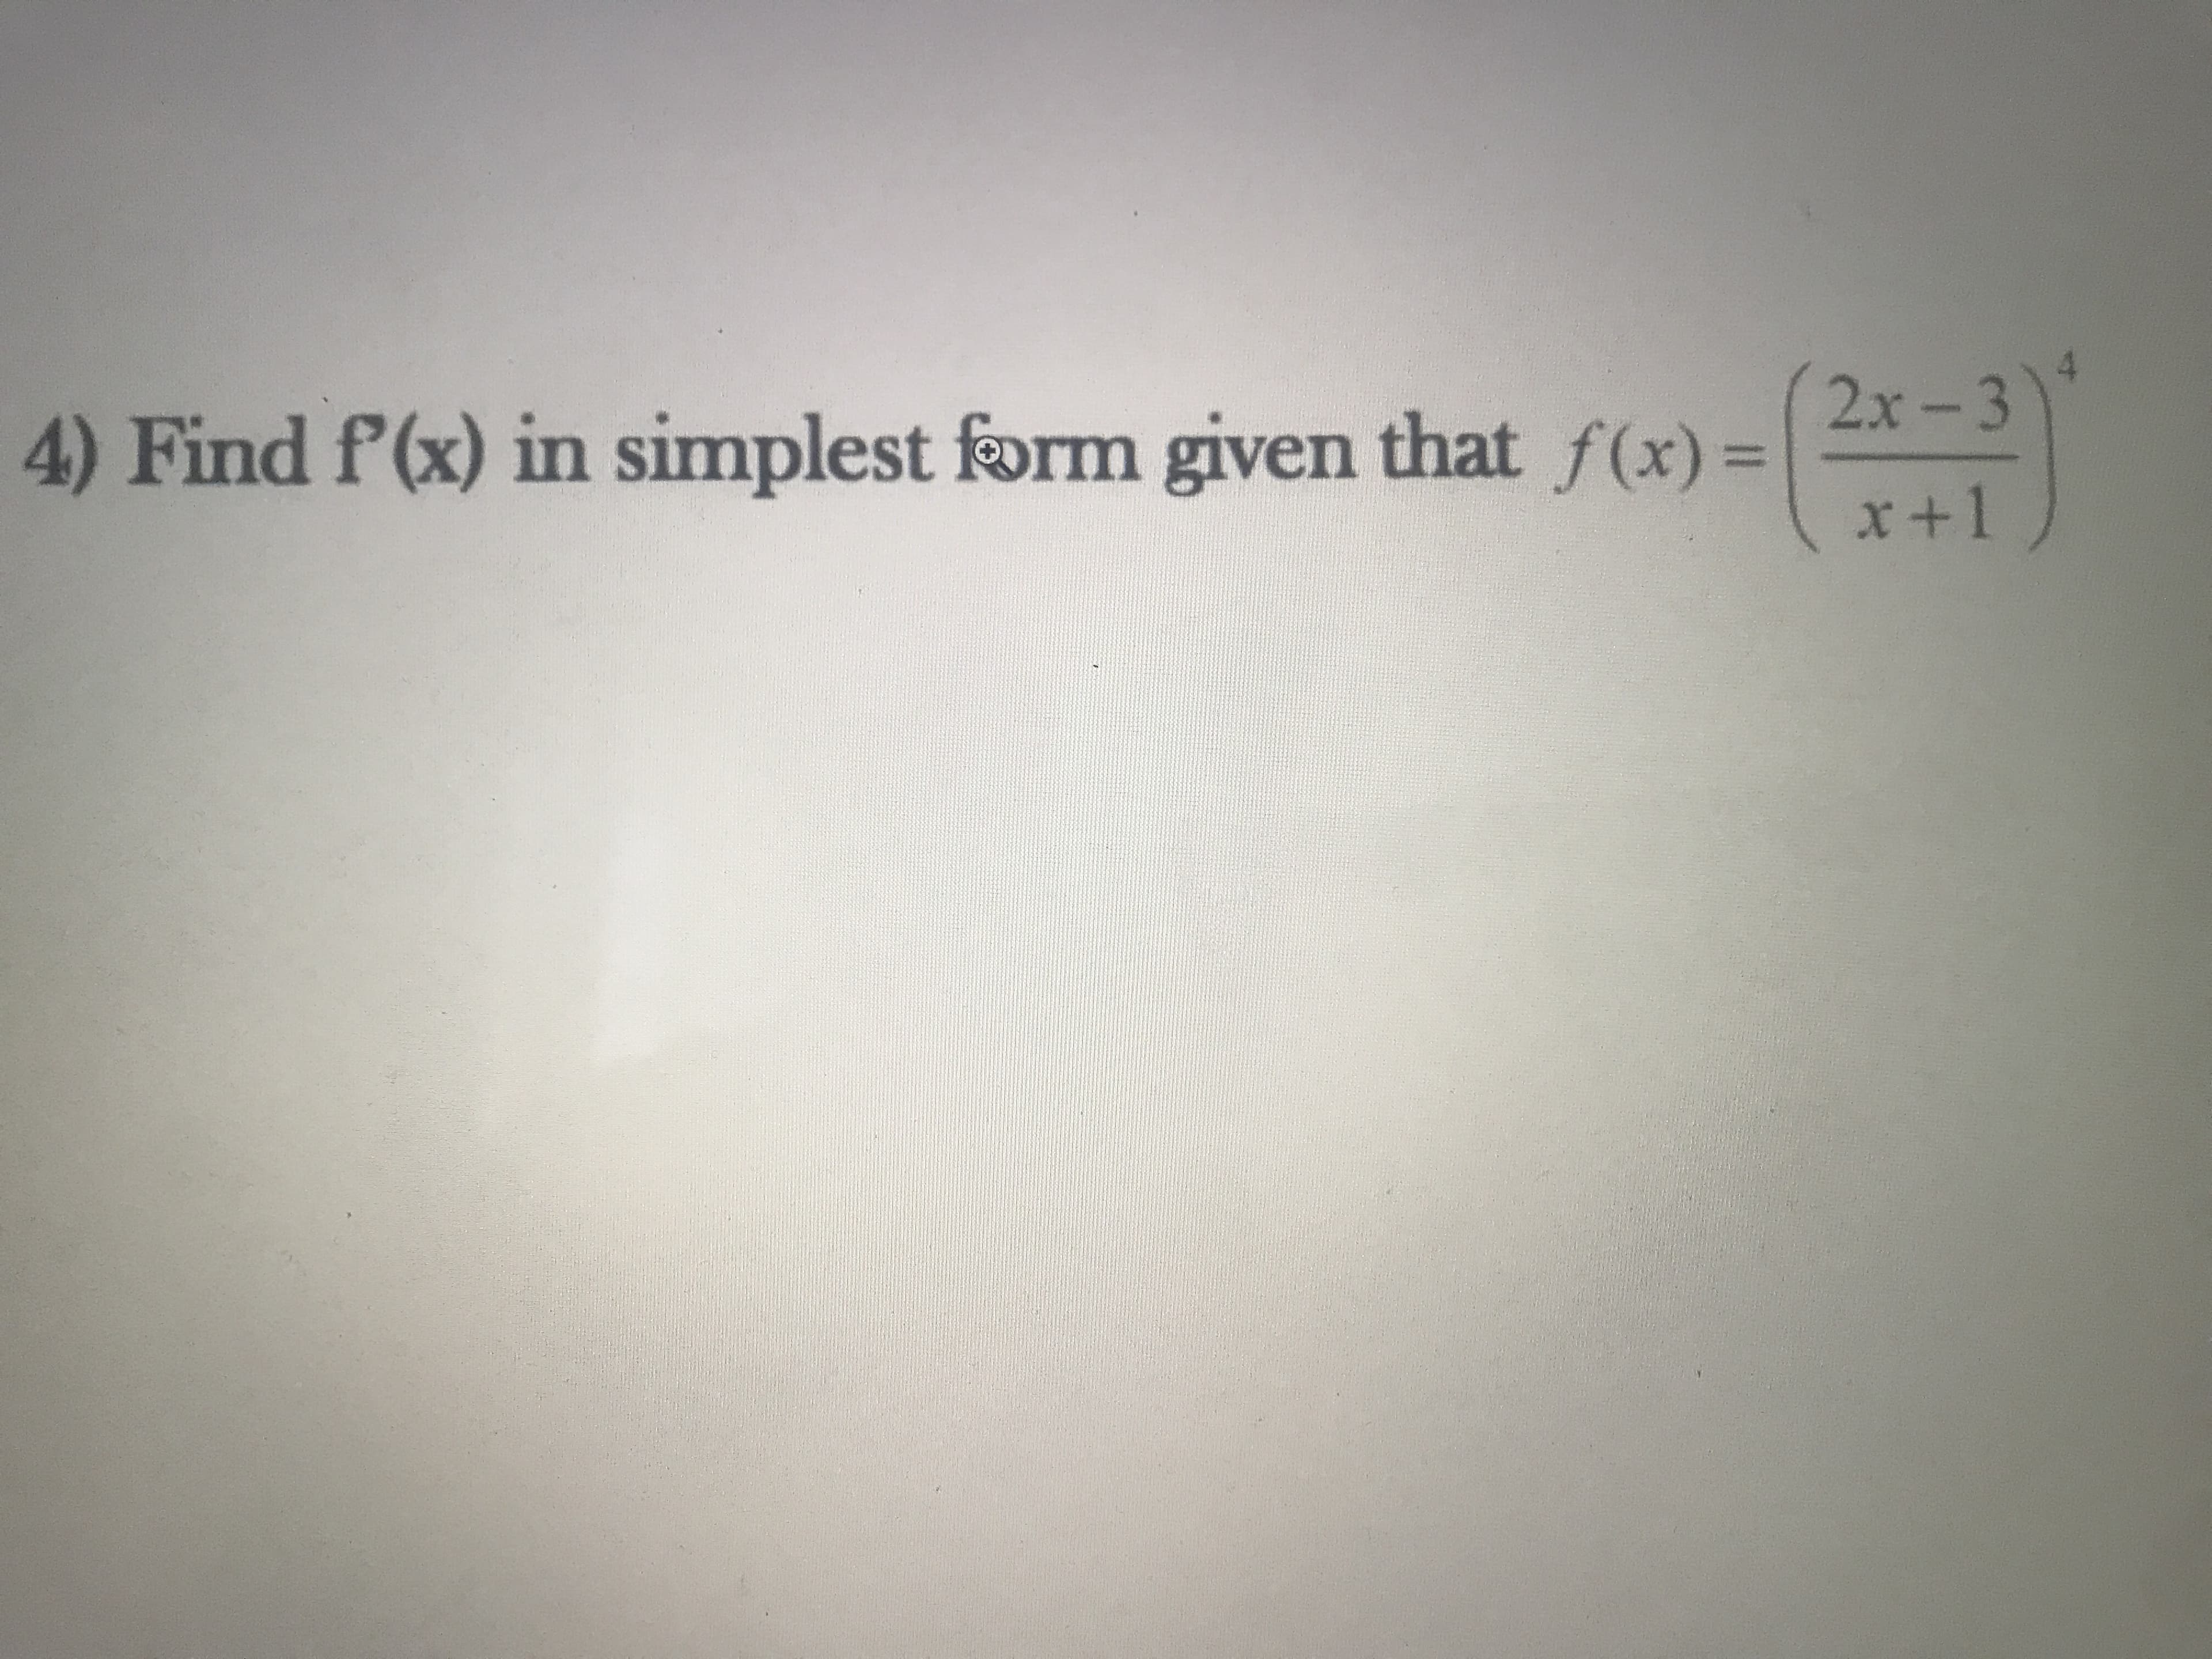 4) Find f(x) in simplest form given that f(x) =
2x-3)
x+1
